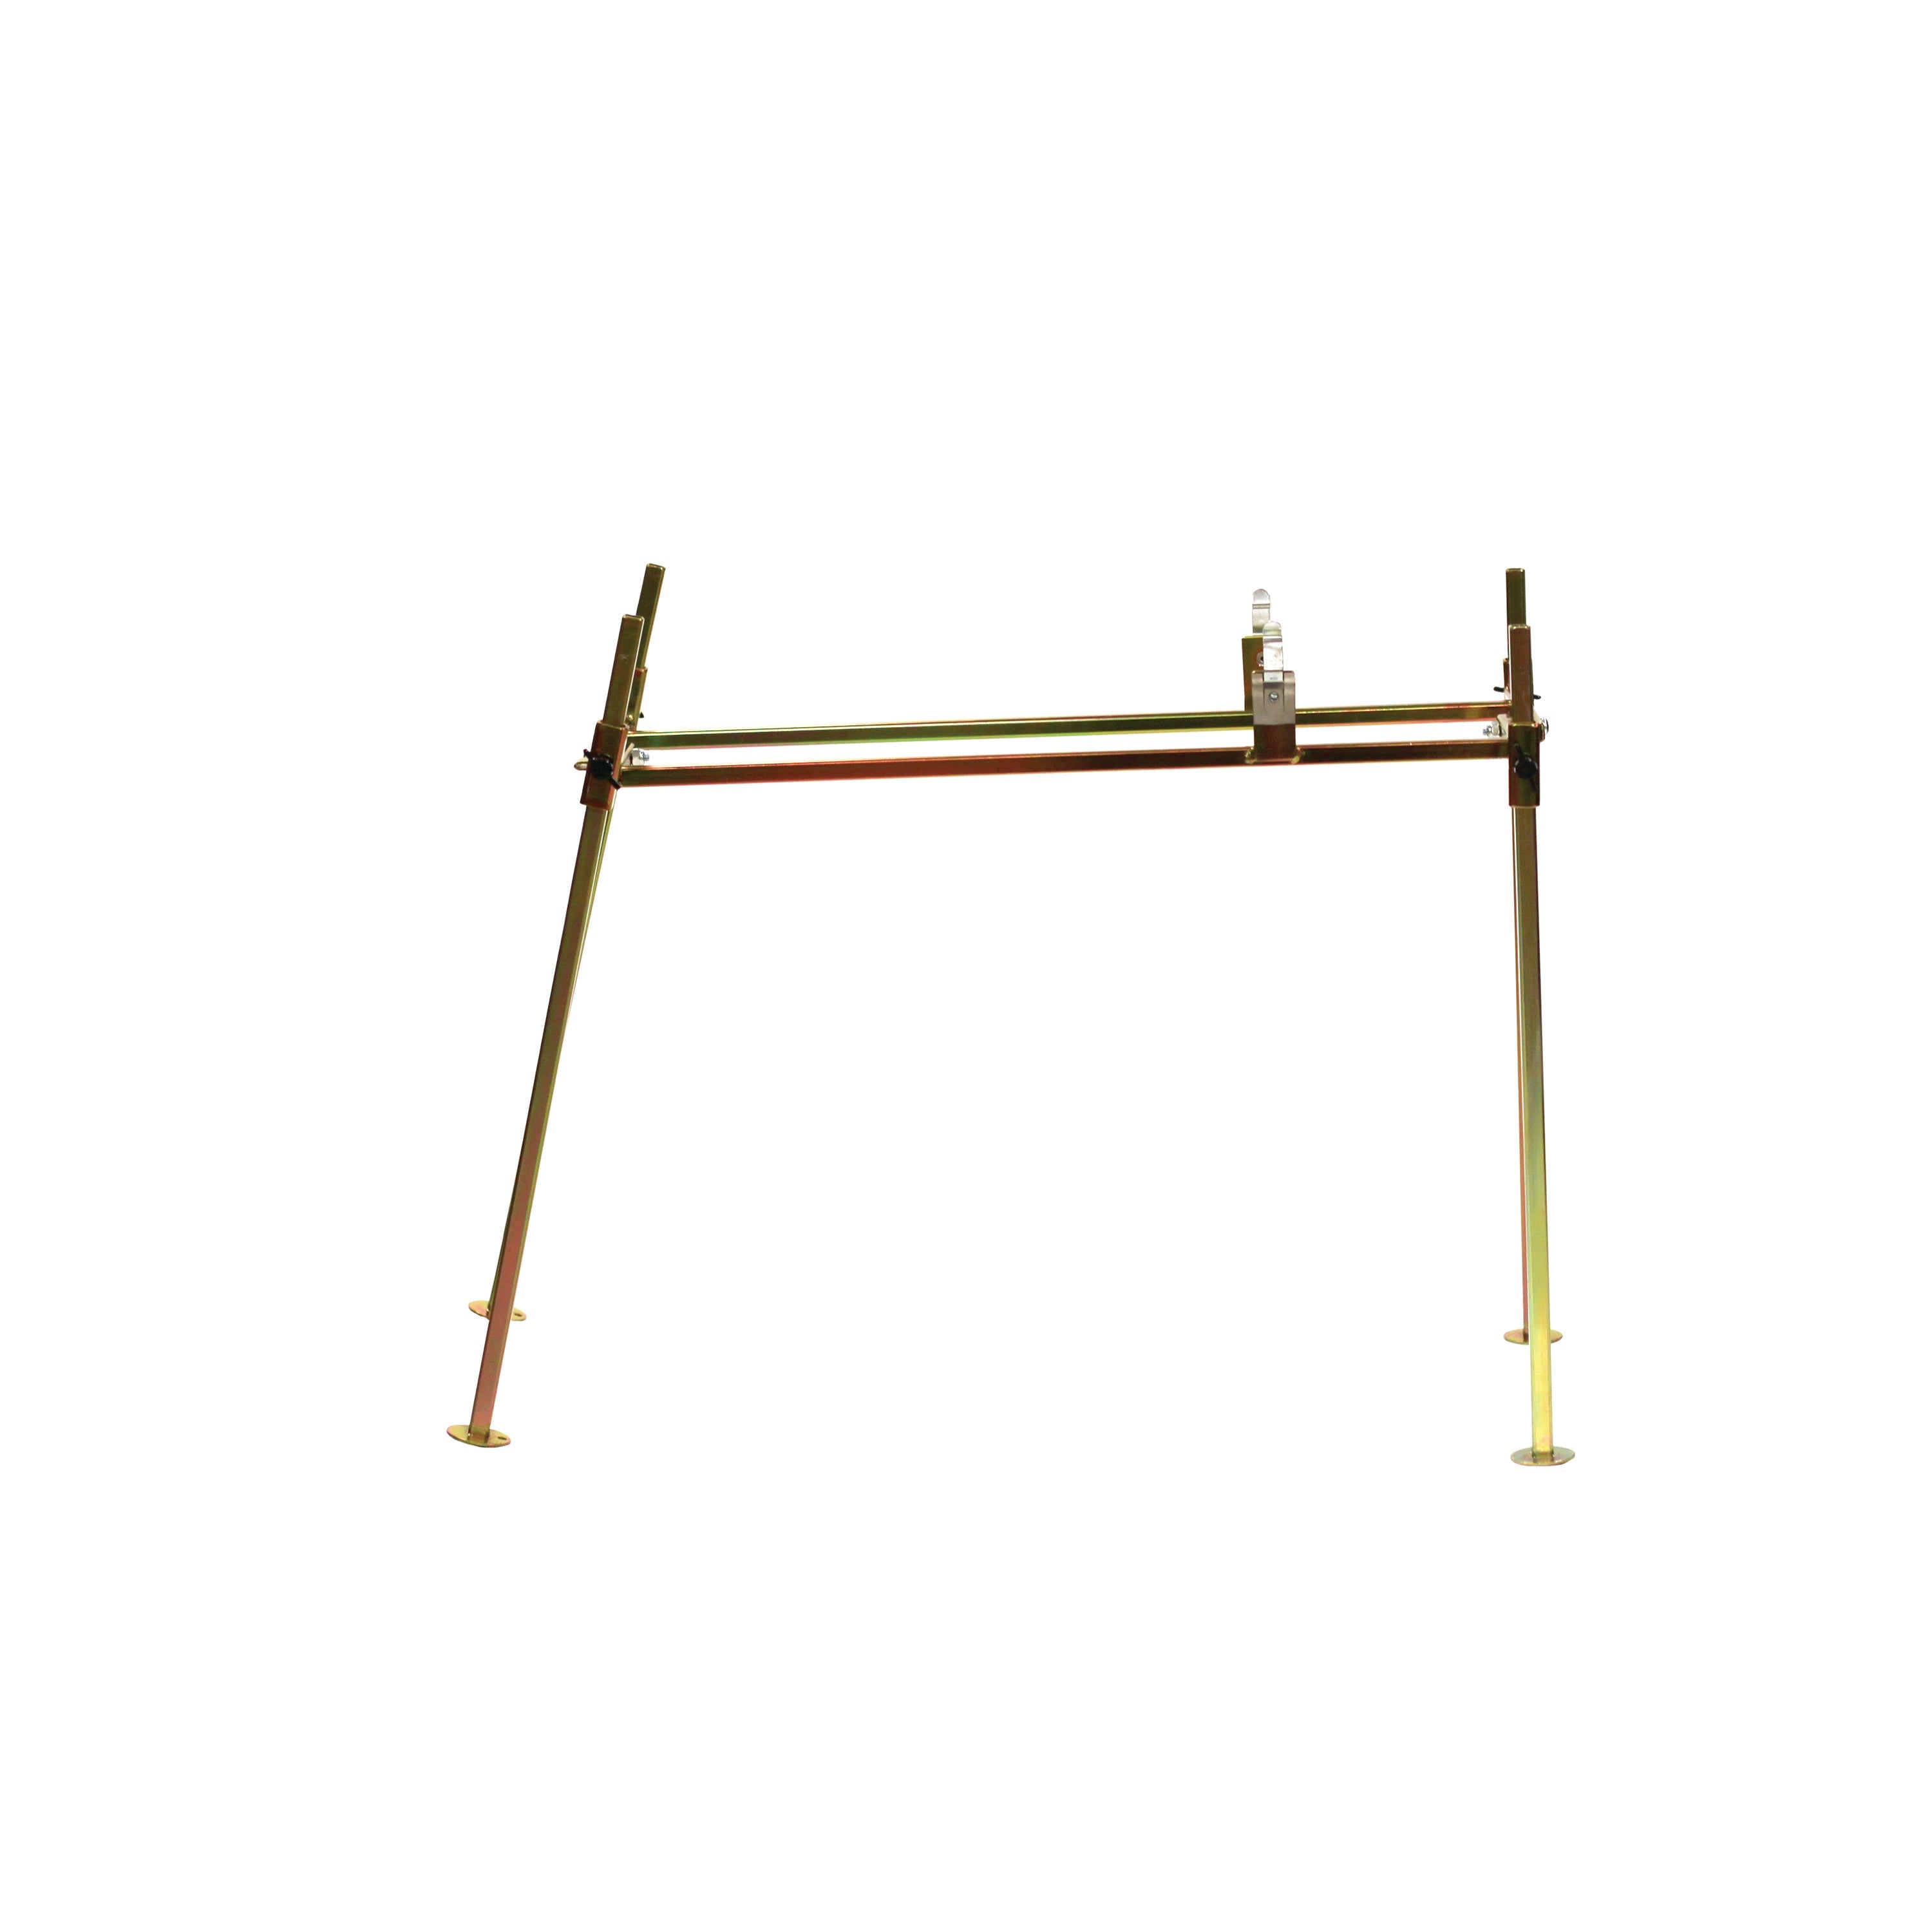 Folding Sluice Stand - 24 Inch X 19 Inch - For # 581 And 582